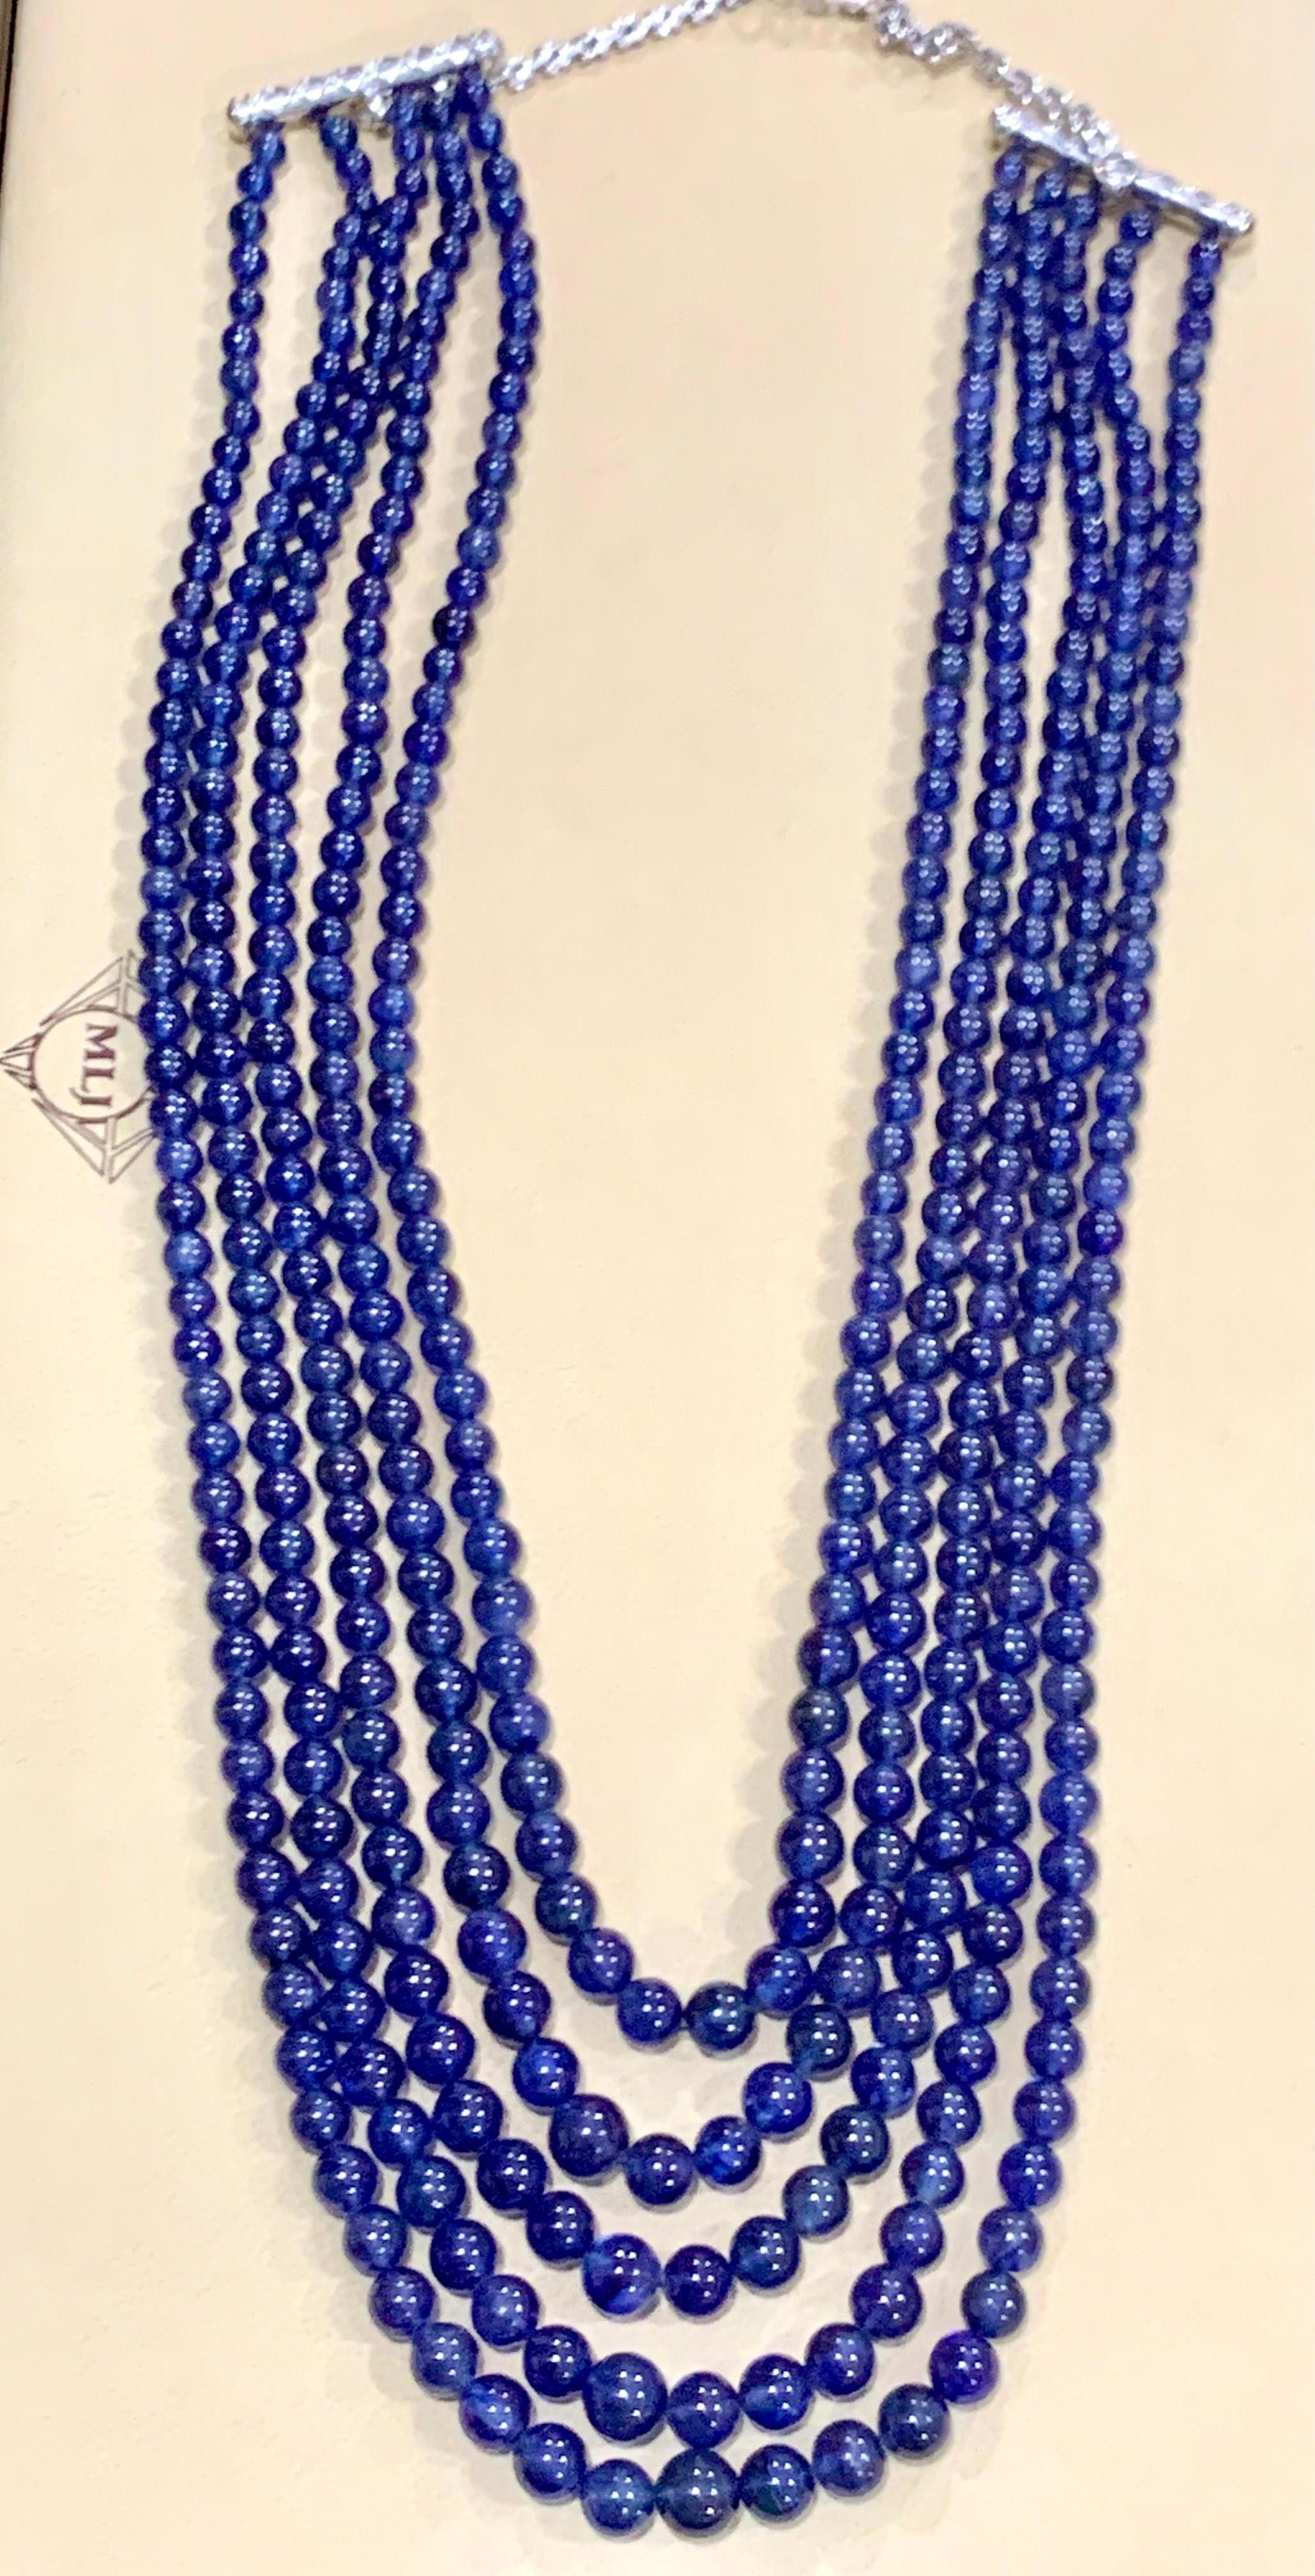 Smooth Approximately  800 Carat Natural Tanzanite Bead Five Strand Necklace 14 Karat Gold
All natural beads , no color enhancement
20